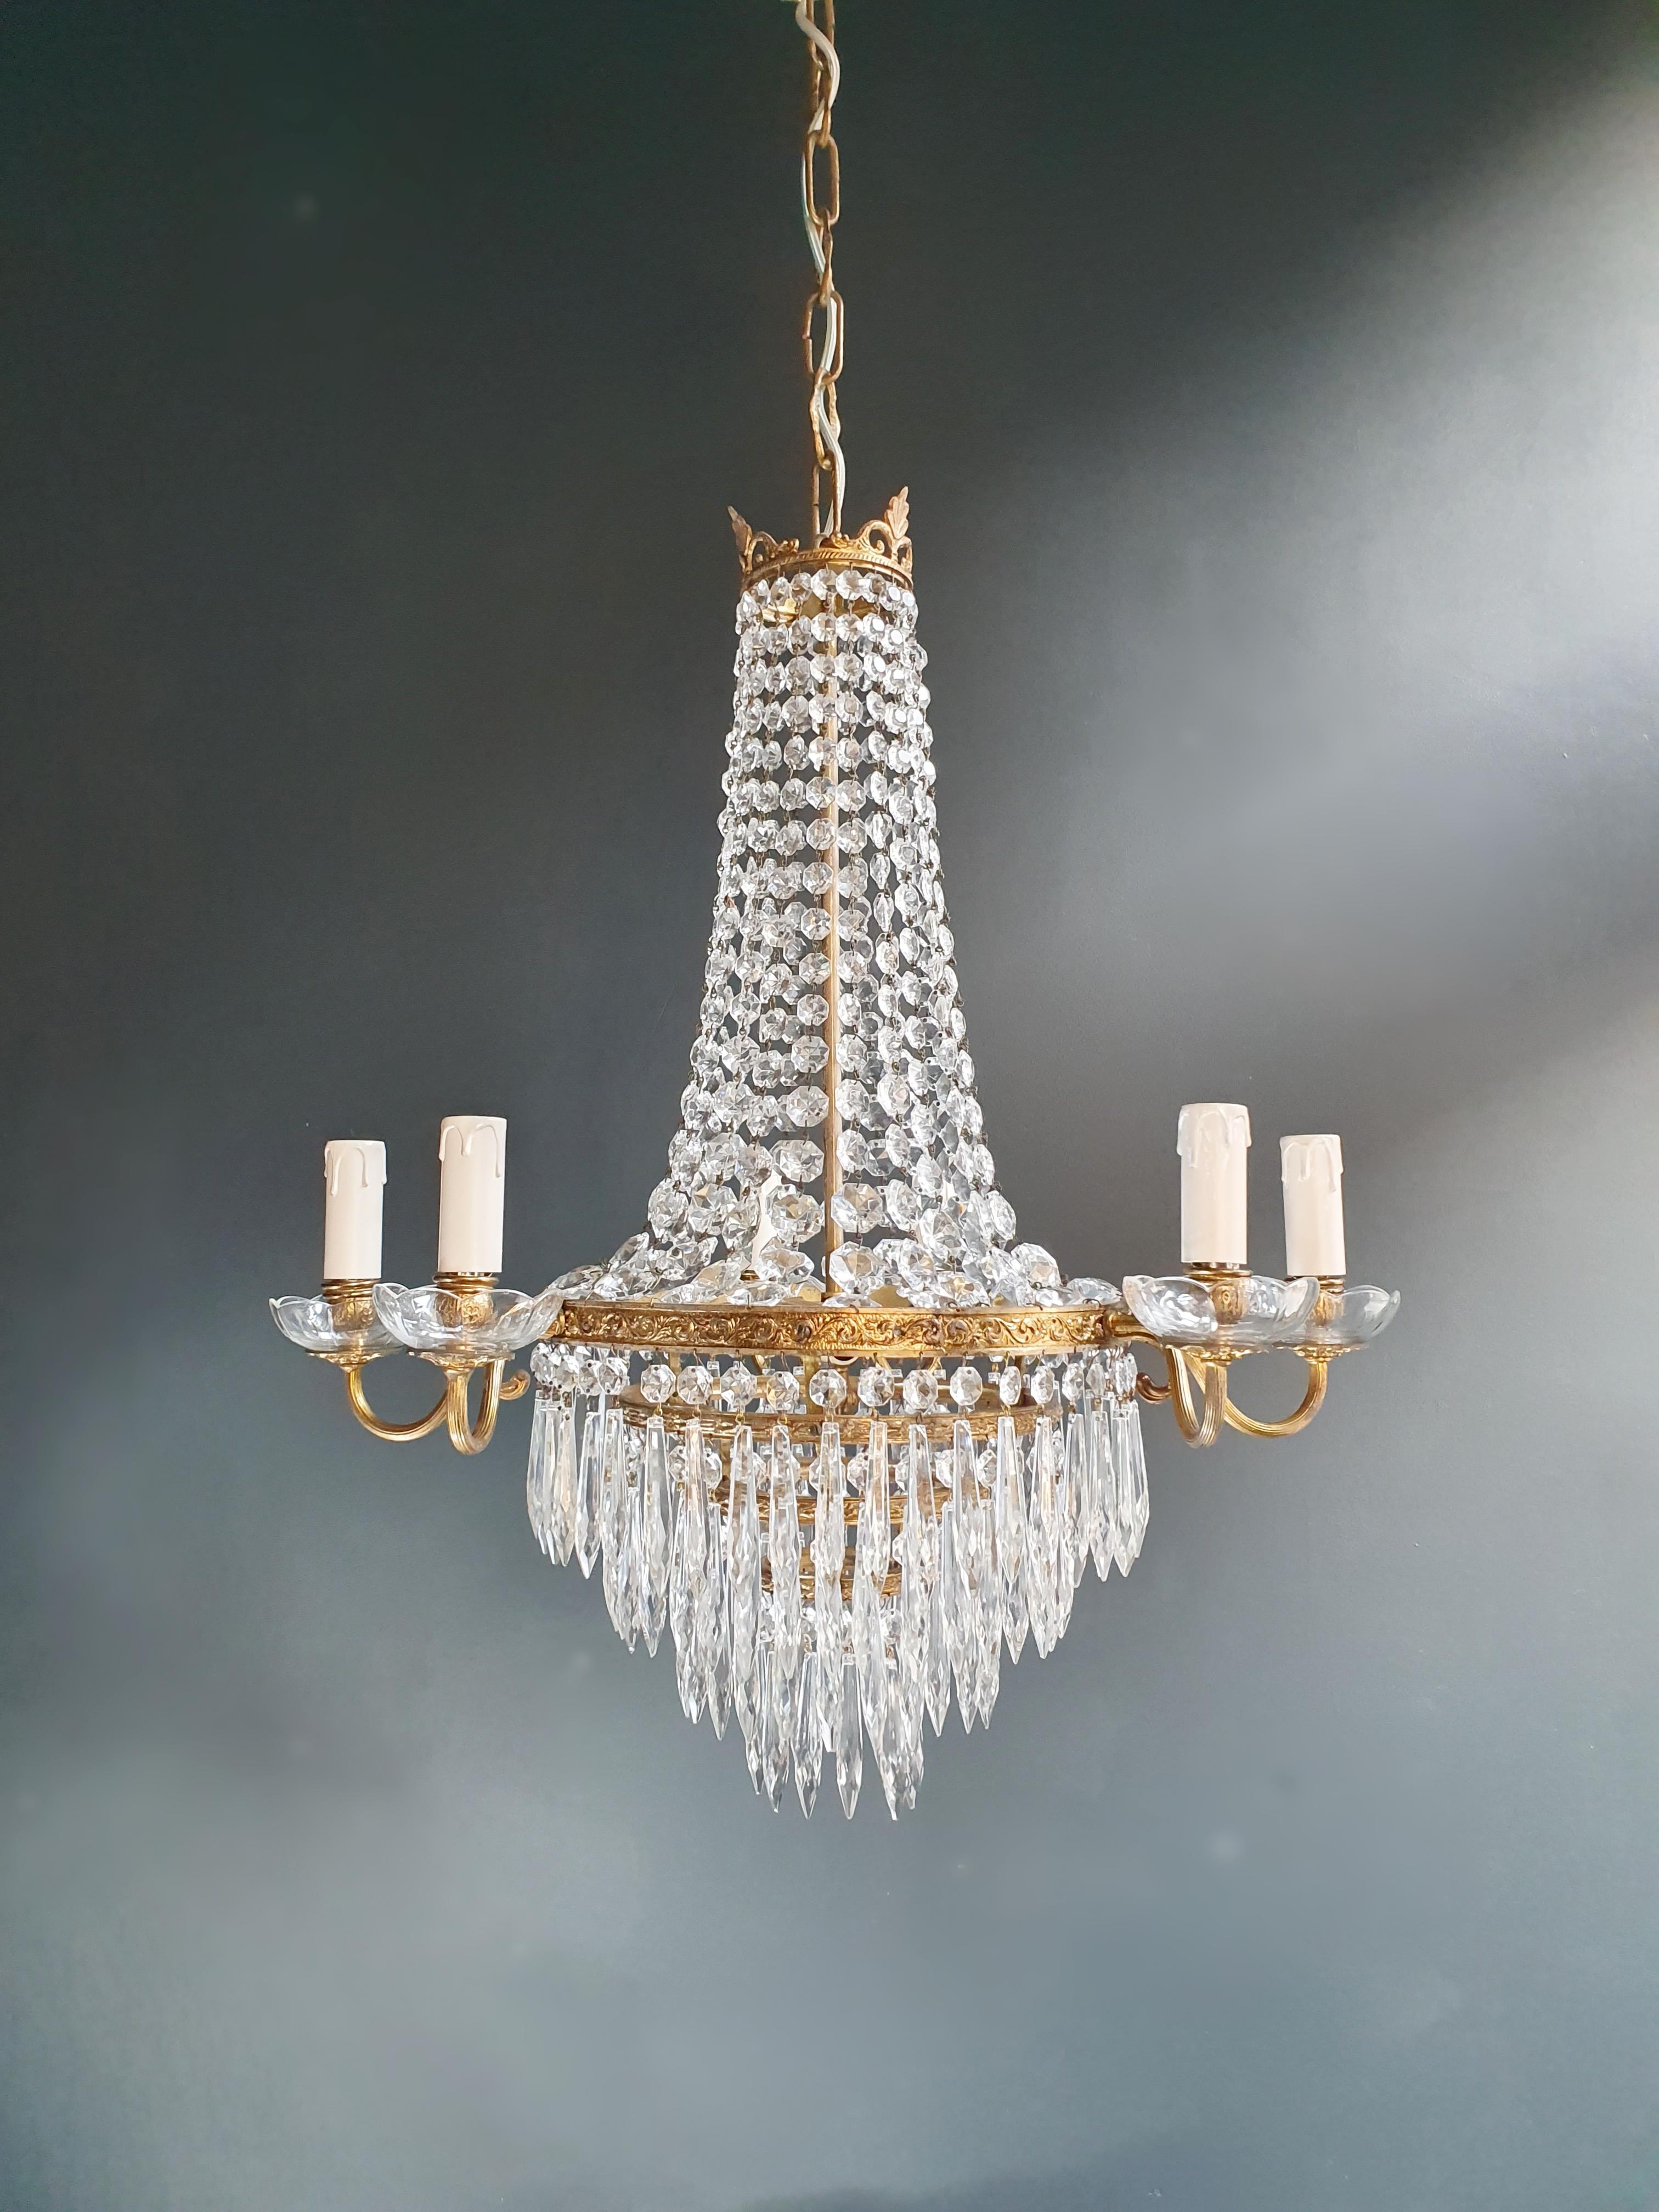 Fine Brass Empire Sac a Pearl Chandelier Crystal Lustre Ceiling Lamp Antique 2